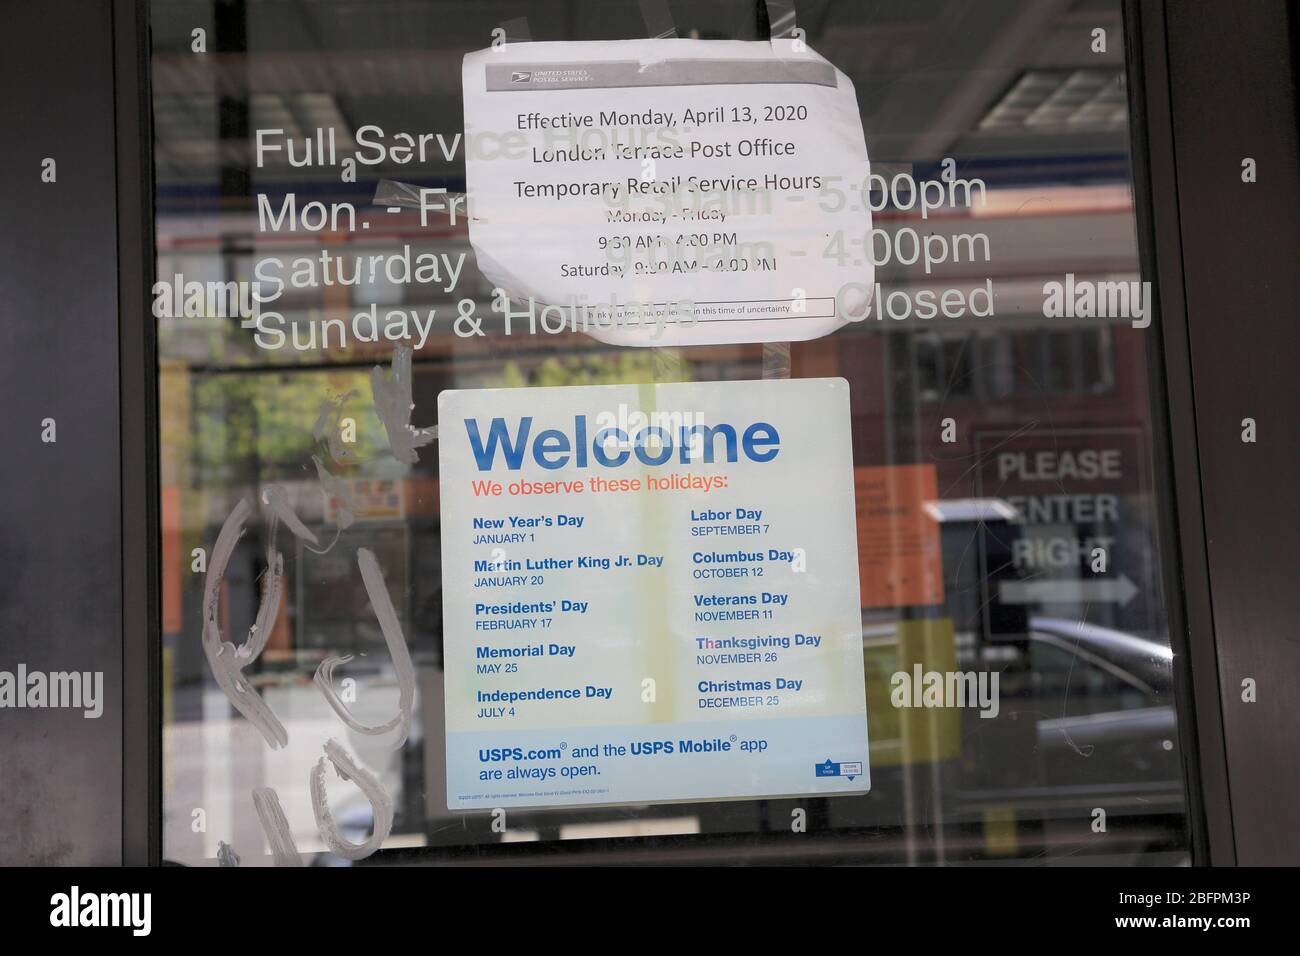 Sign London Terrace Post Office listing reduced hours due to coronavirus, Chelsea, New York City, April 19, 2020 Stock Photo